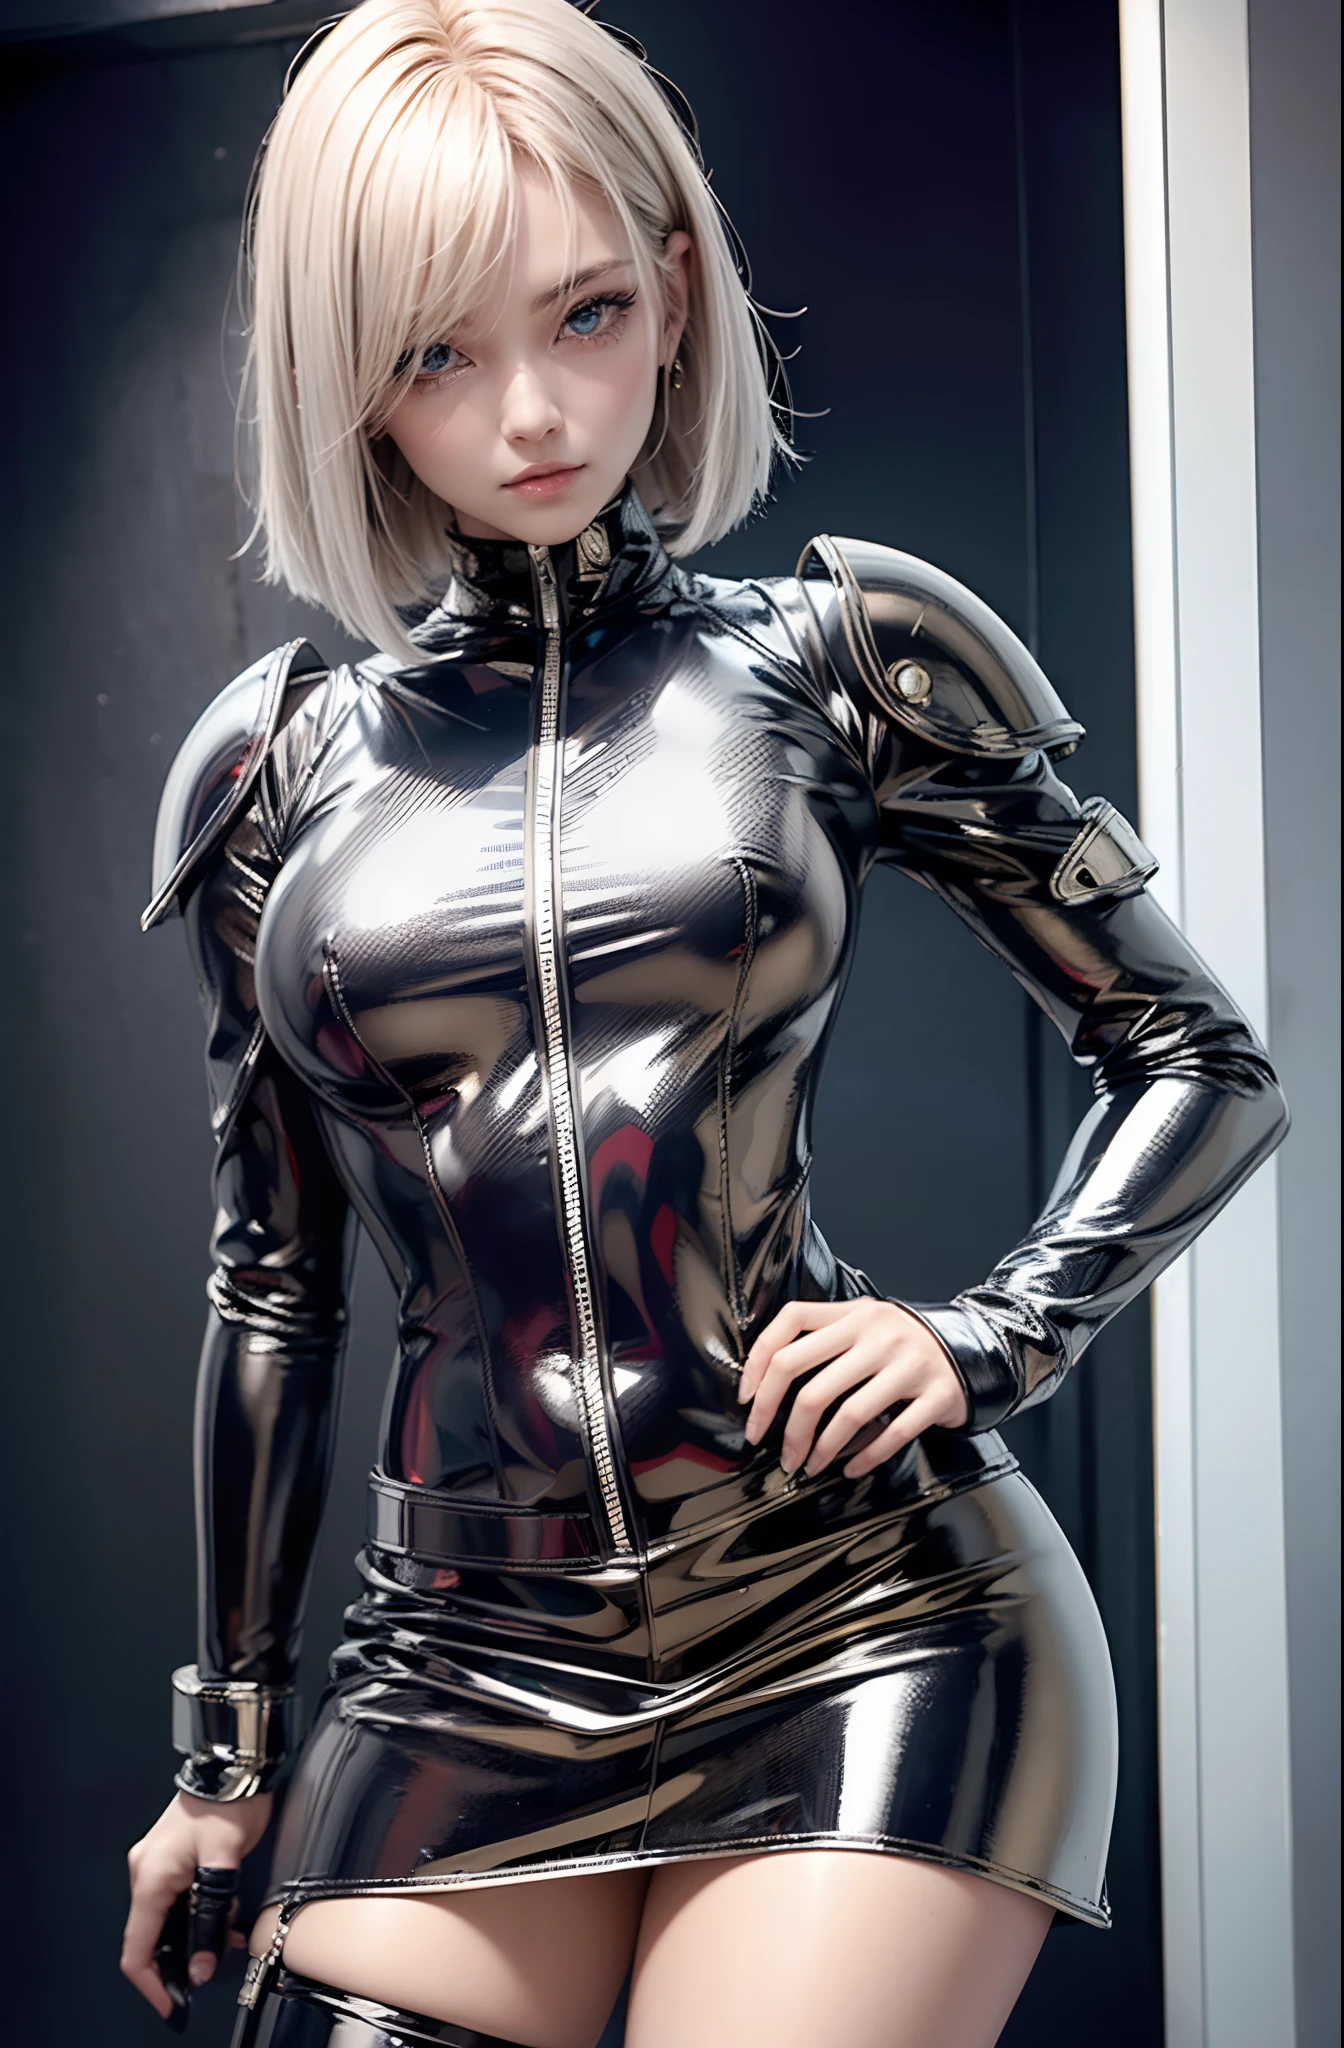 The best quality, high resolution, Y18, 1girl in, Android 18, only, blond hair, blue eyes, short hair, lovely smile，earrings, jewely, very big chest, Woman in black leather clothing posing for photo, Golden Uniform, Silver armor and gold clothing, Shiny plastic armor skirt, Cyberpunk Shiny Latex Skirt, chrome suit, Futuristic shiny latex skirt, Shiny from the rain, shiny latex, shiny shiny reflective